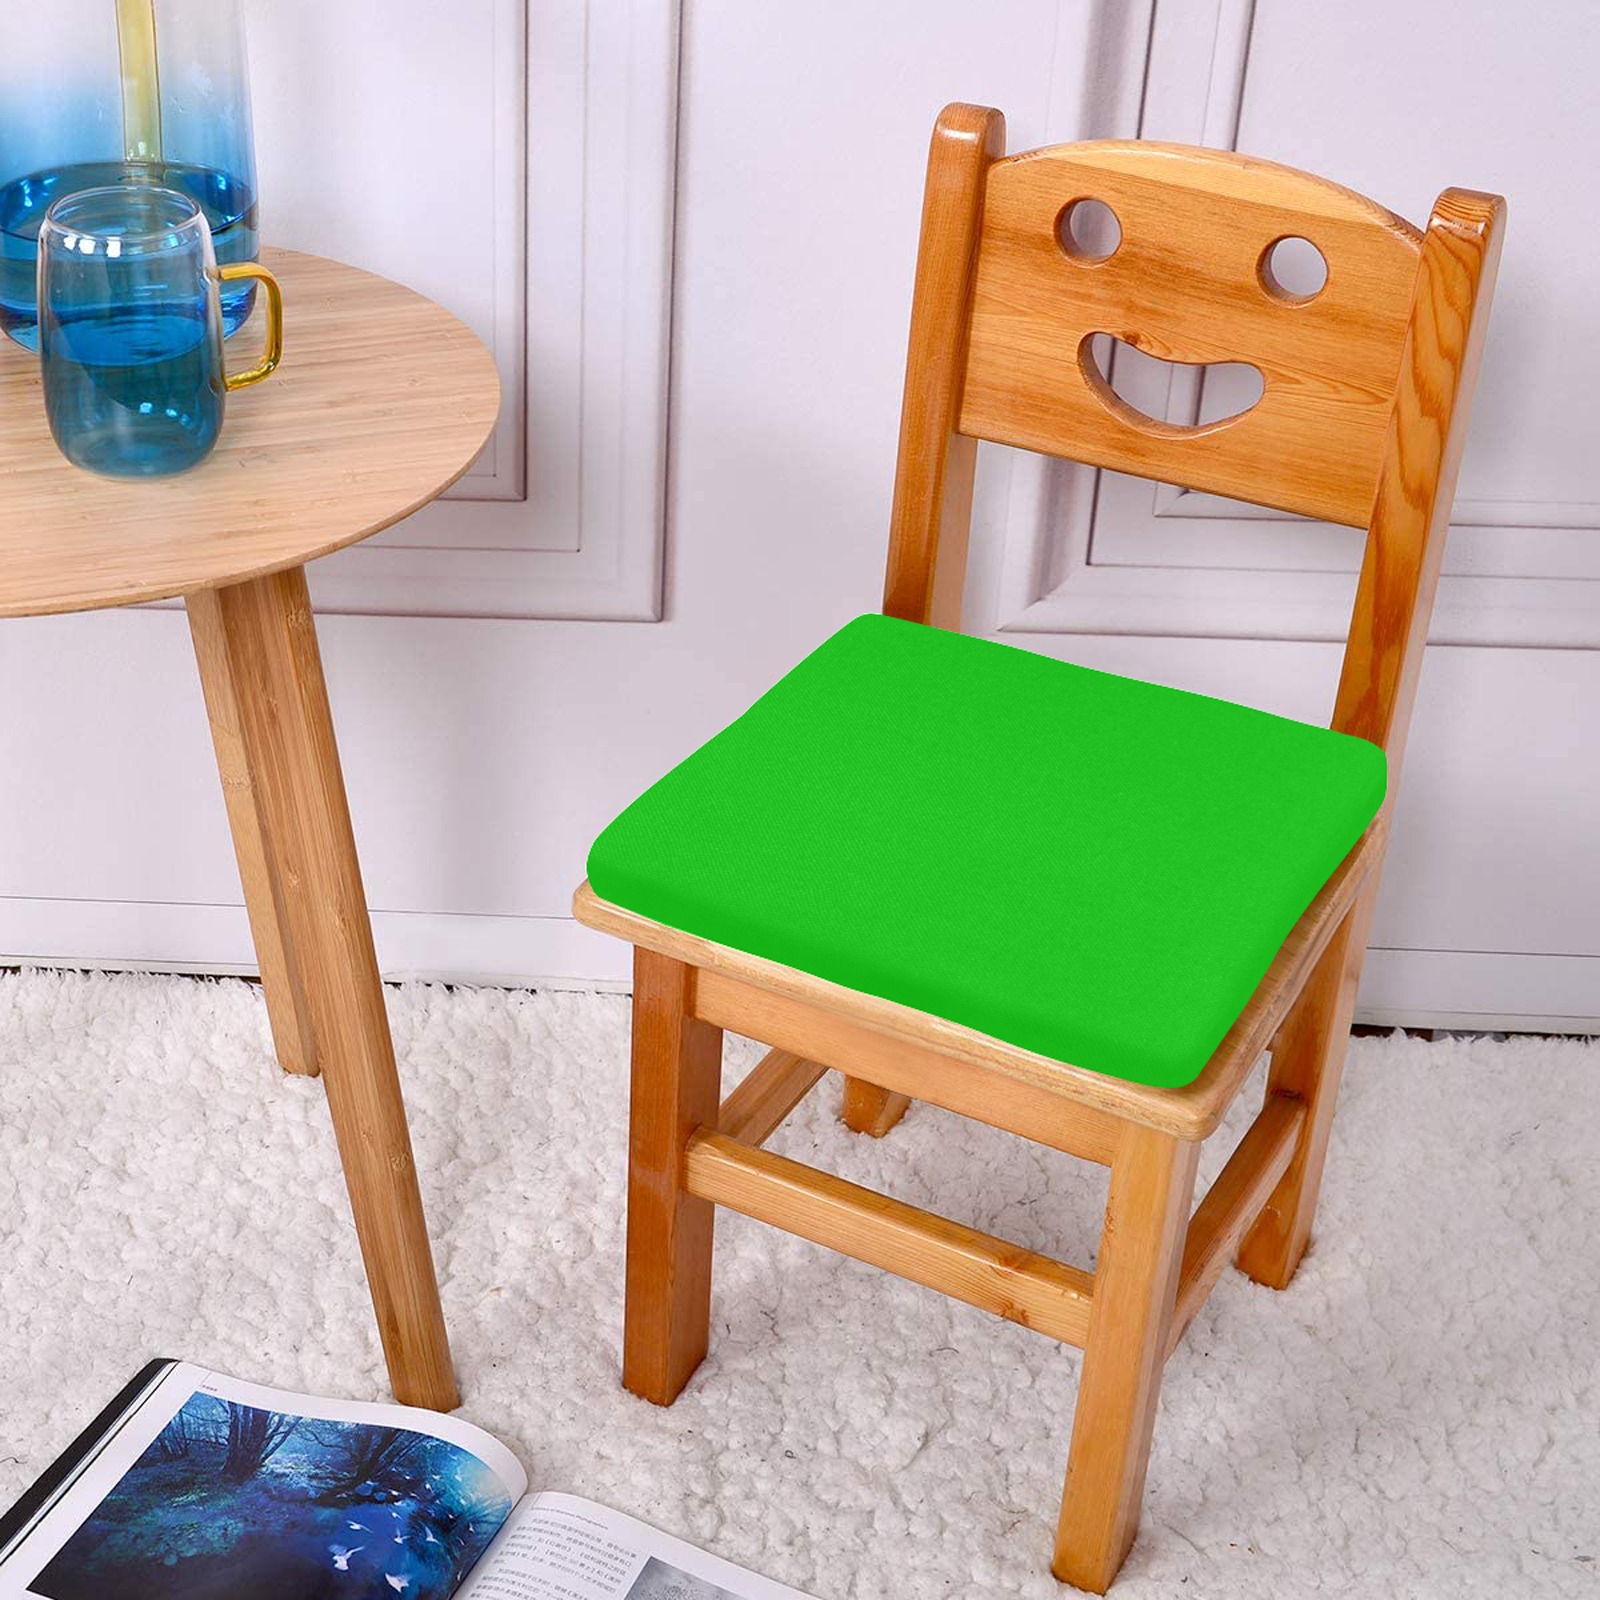 Merry Christmas Green Solid Color Rectangular Seat Cushion